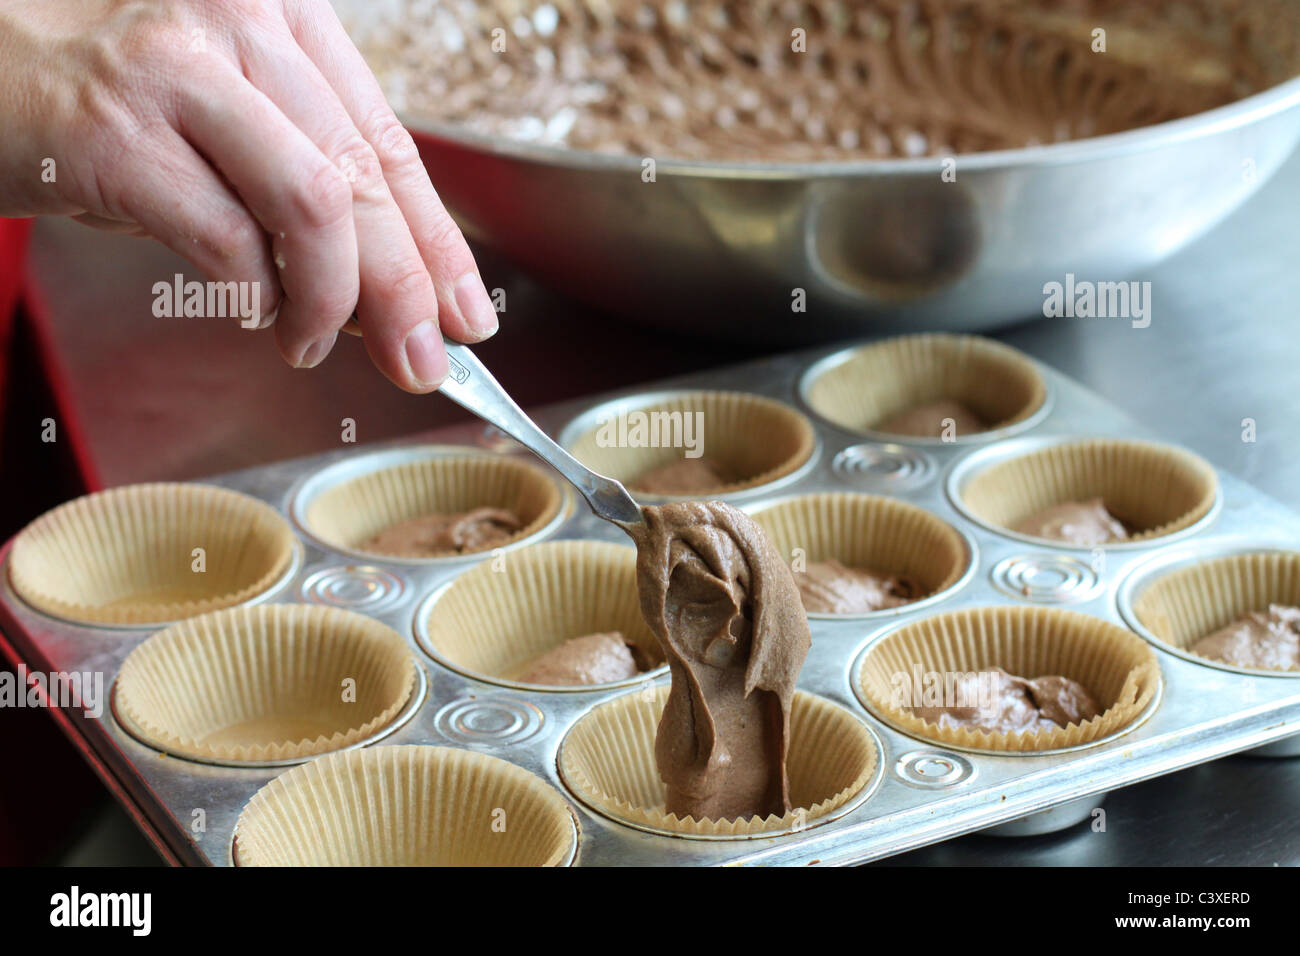 https://c8.alamy.com/comp/C3XERD/a-close-up-of-a-womans-hand-pouring-batter-into-cupcake-tins-C3XERD.jpg